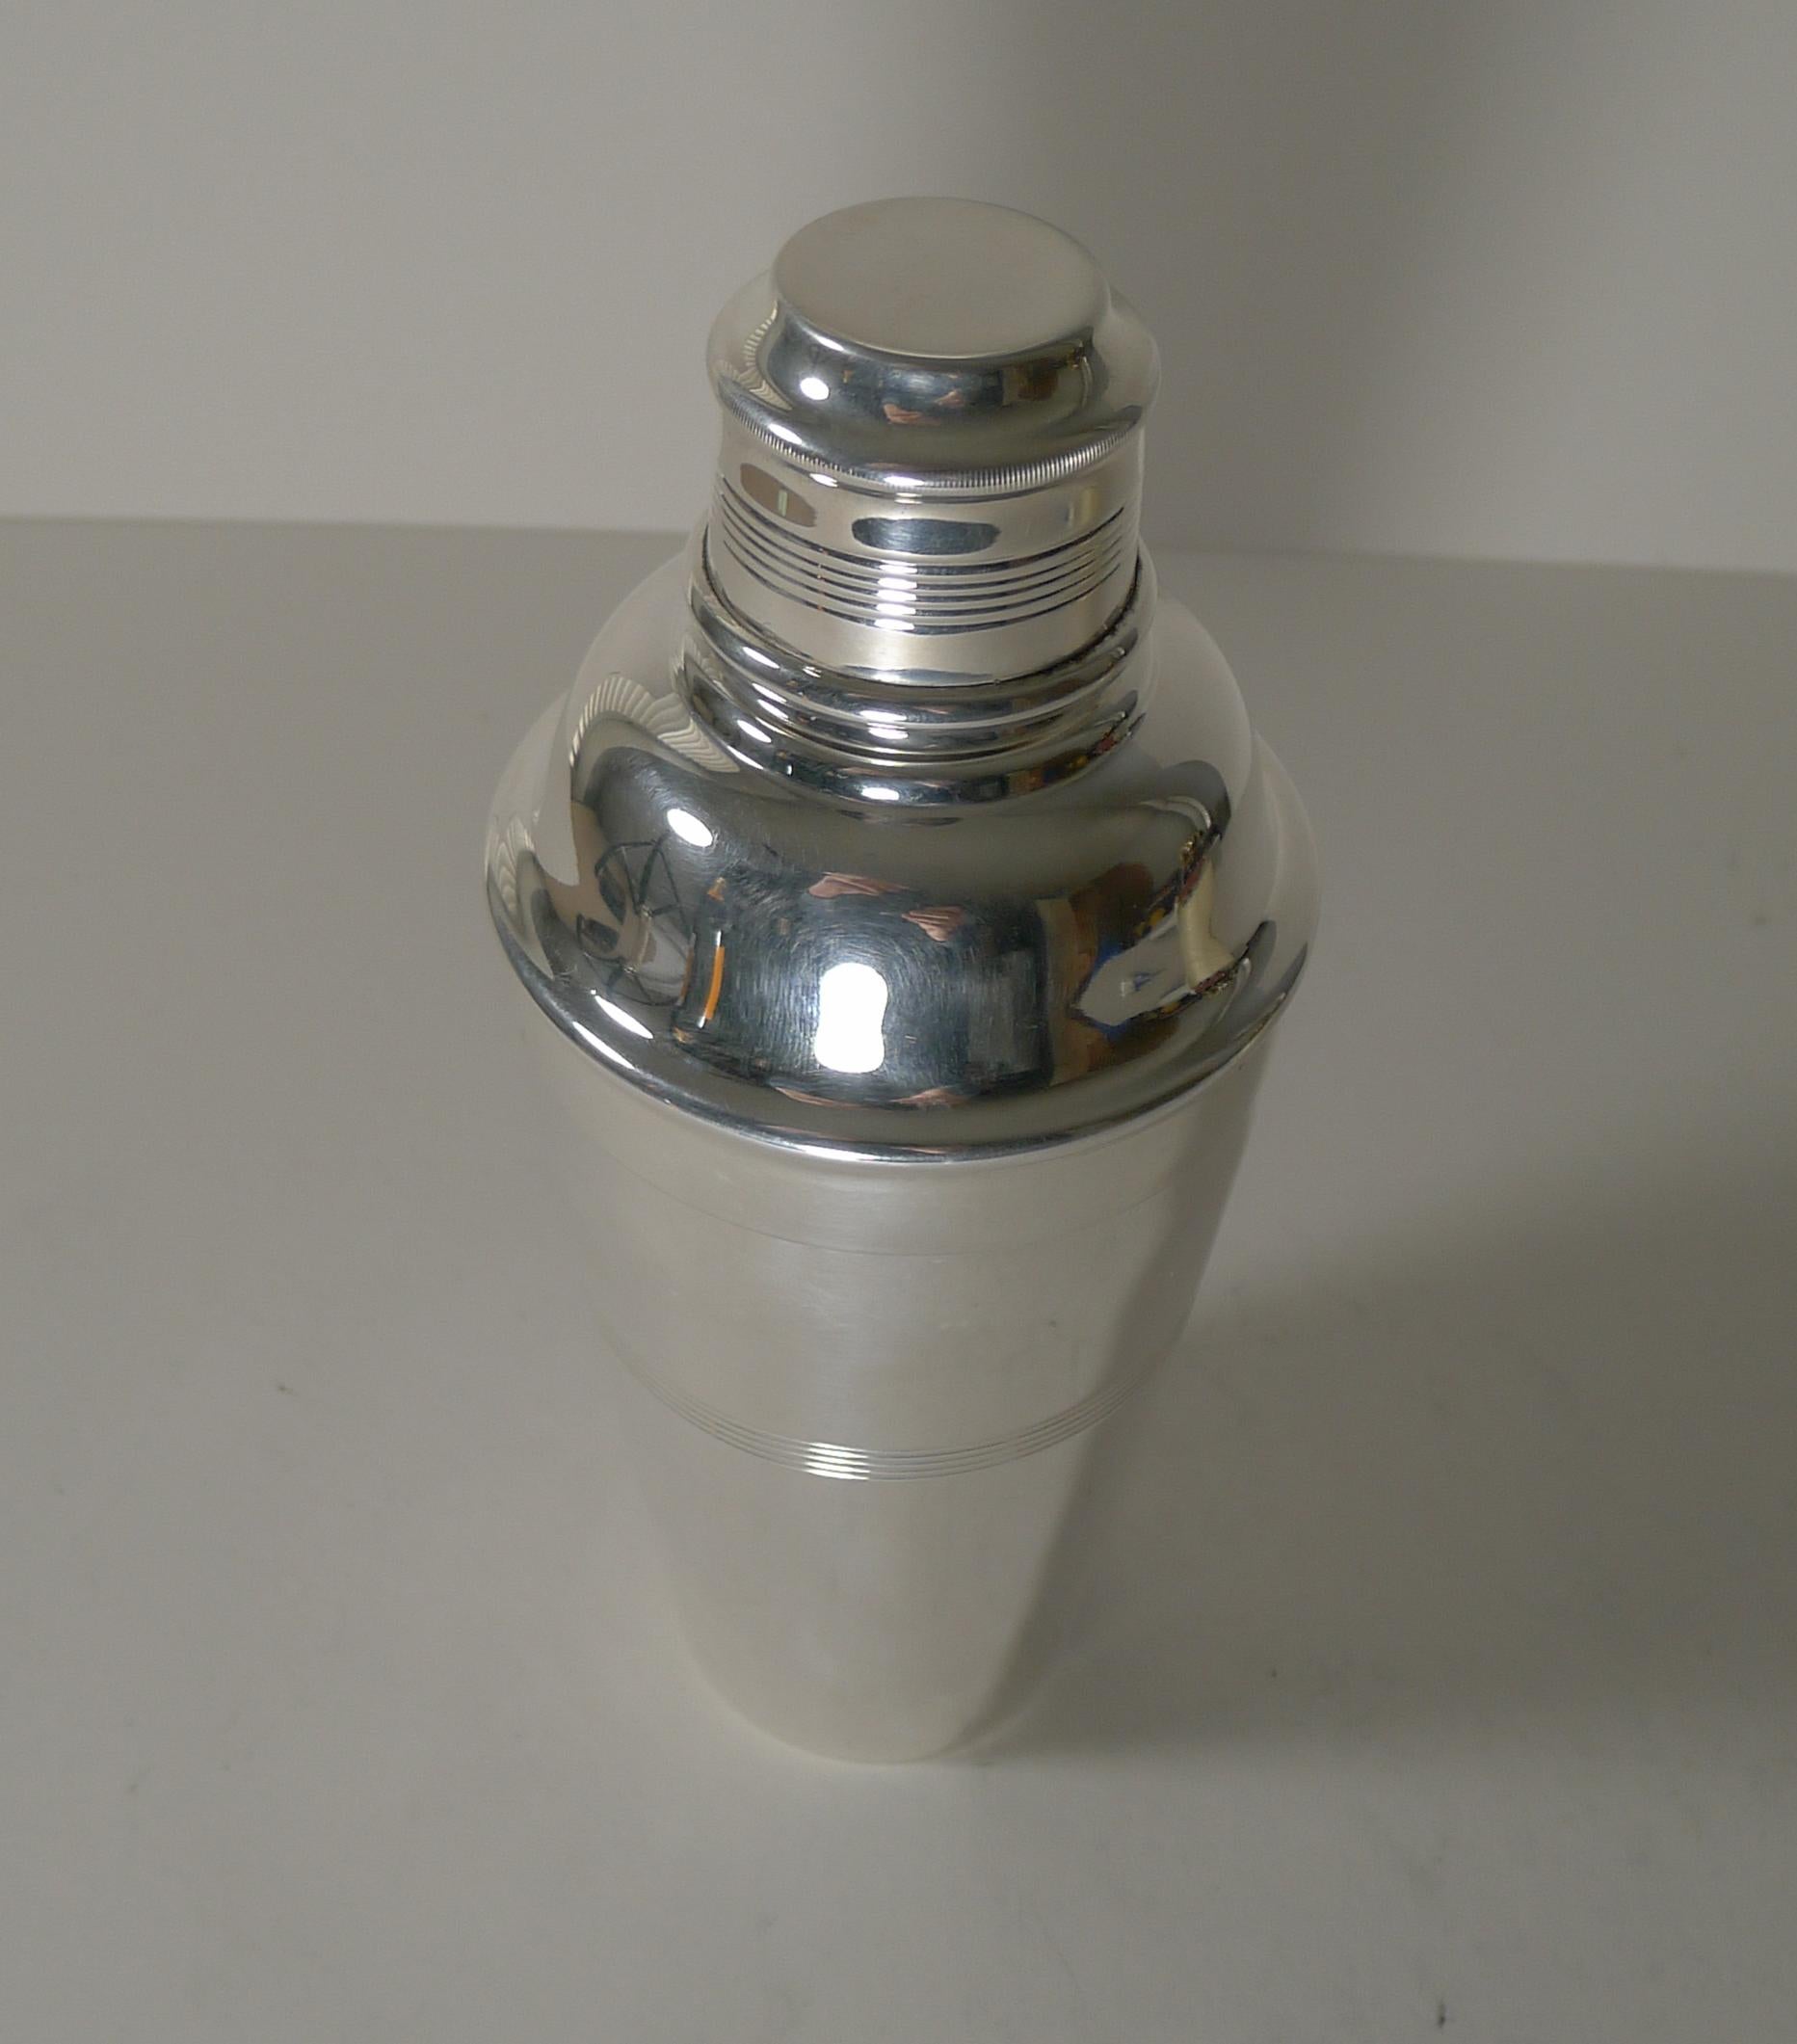 A handsome English silver plated cocktail shaker by the top-notch silversmith, Elkington & Co.

Excellent condition dating to c.1940; standing 8